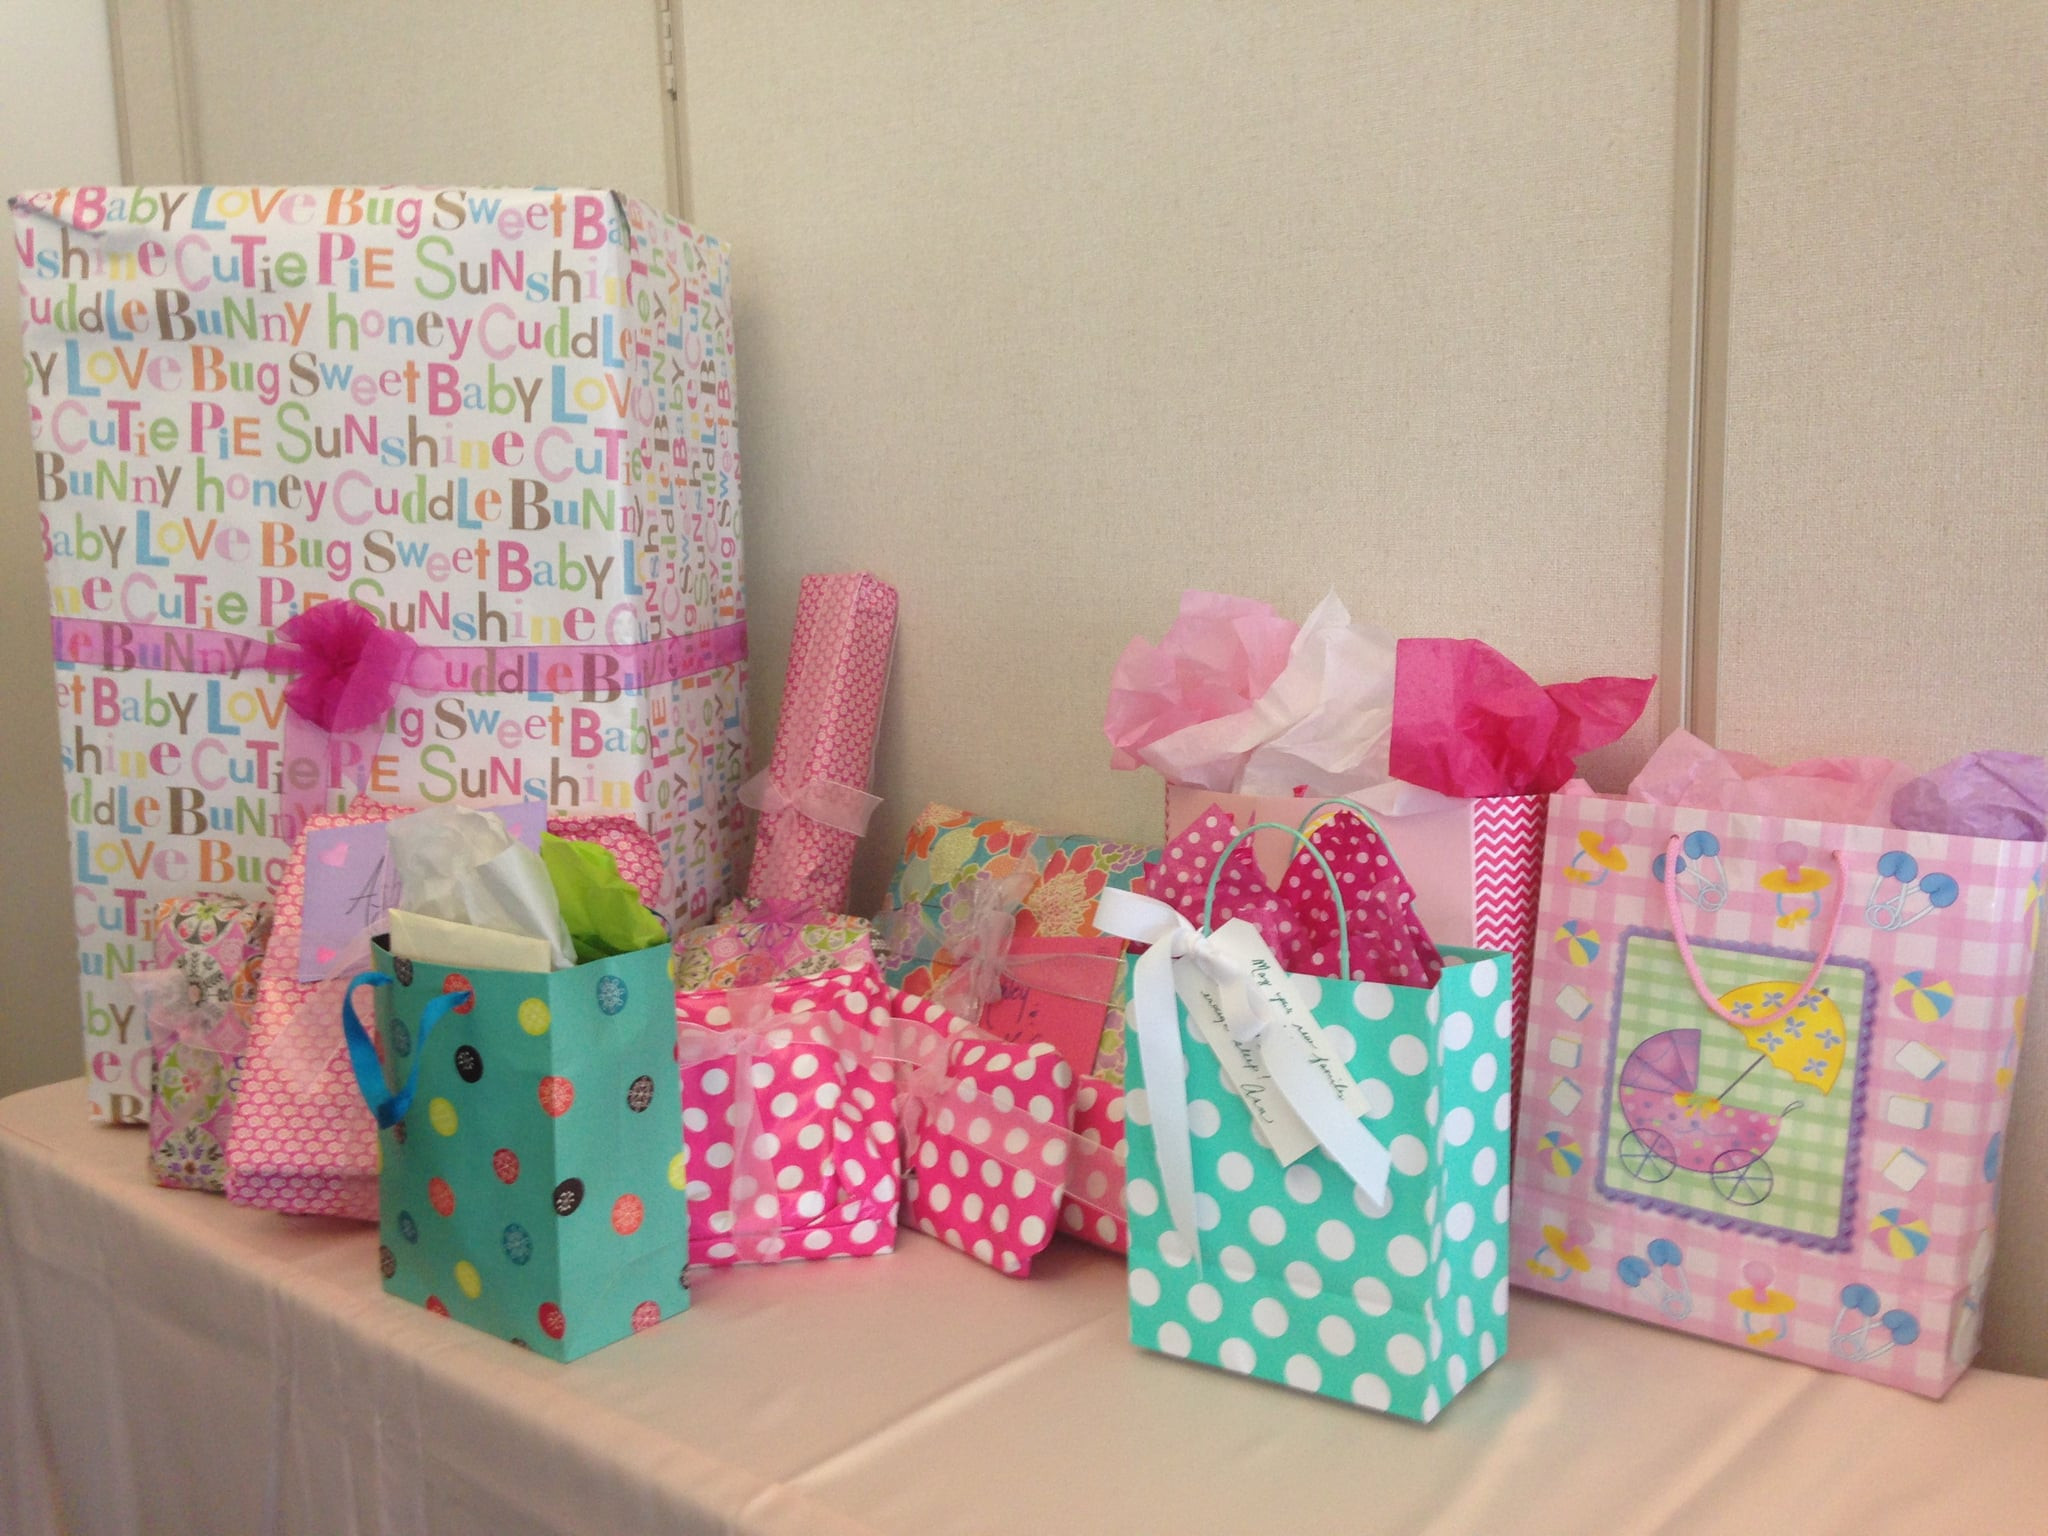 Keepsake Baby Shower Gifts
 How Much Should You Spend on a Baby Shower Gift